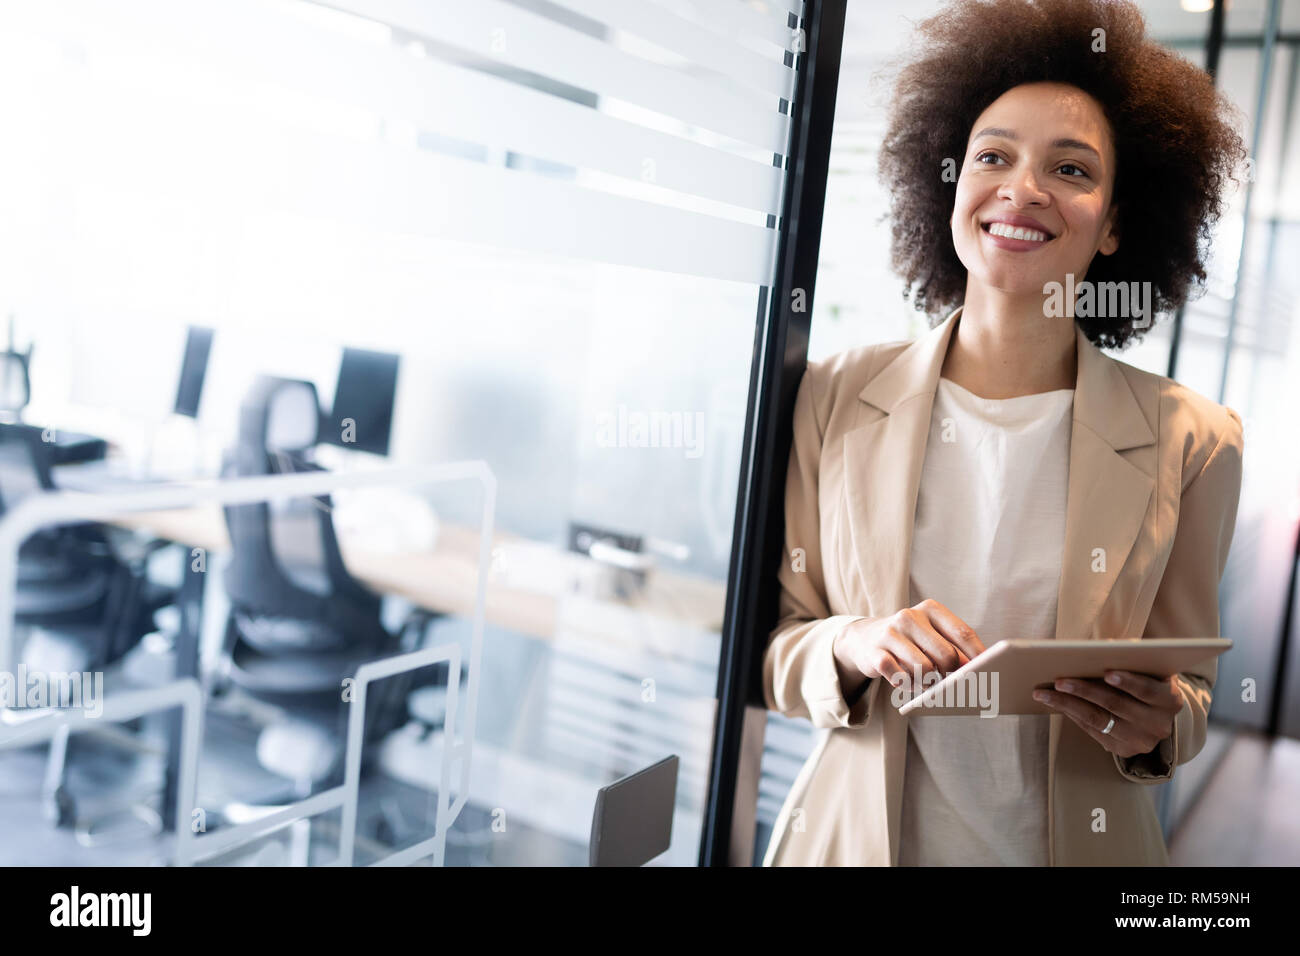 Portrait of a happy young african business woman smiling Stock Photo